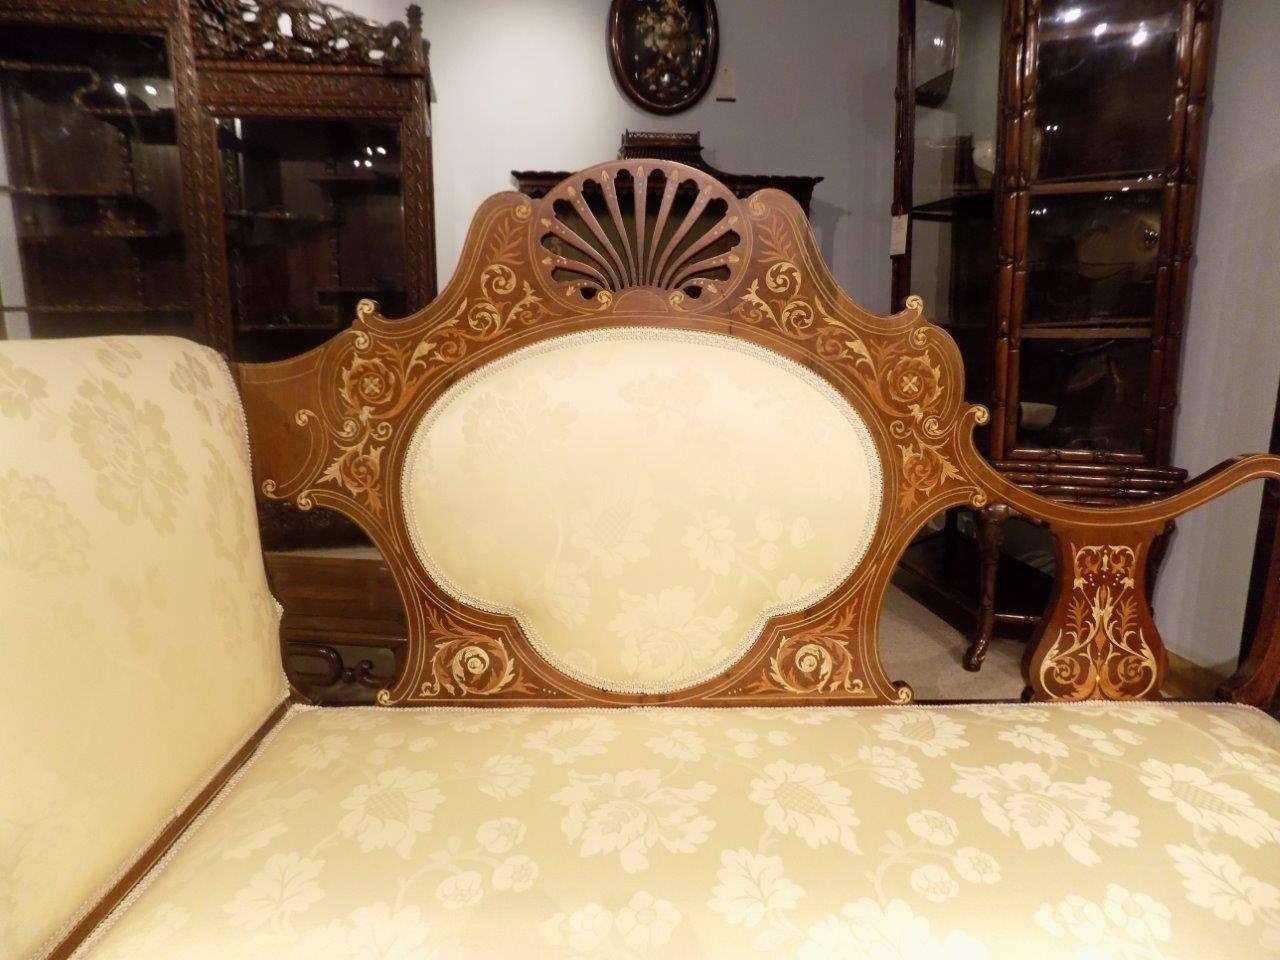 Early 20th Century Mahogany and Marquetry Inlaid Edwardian Period Antique Settee